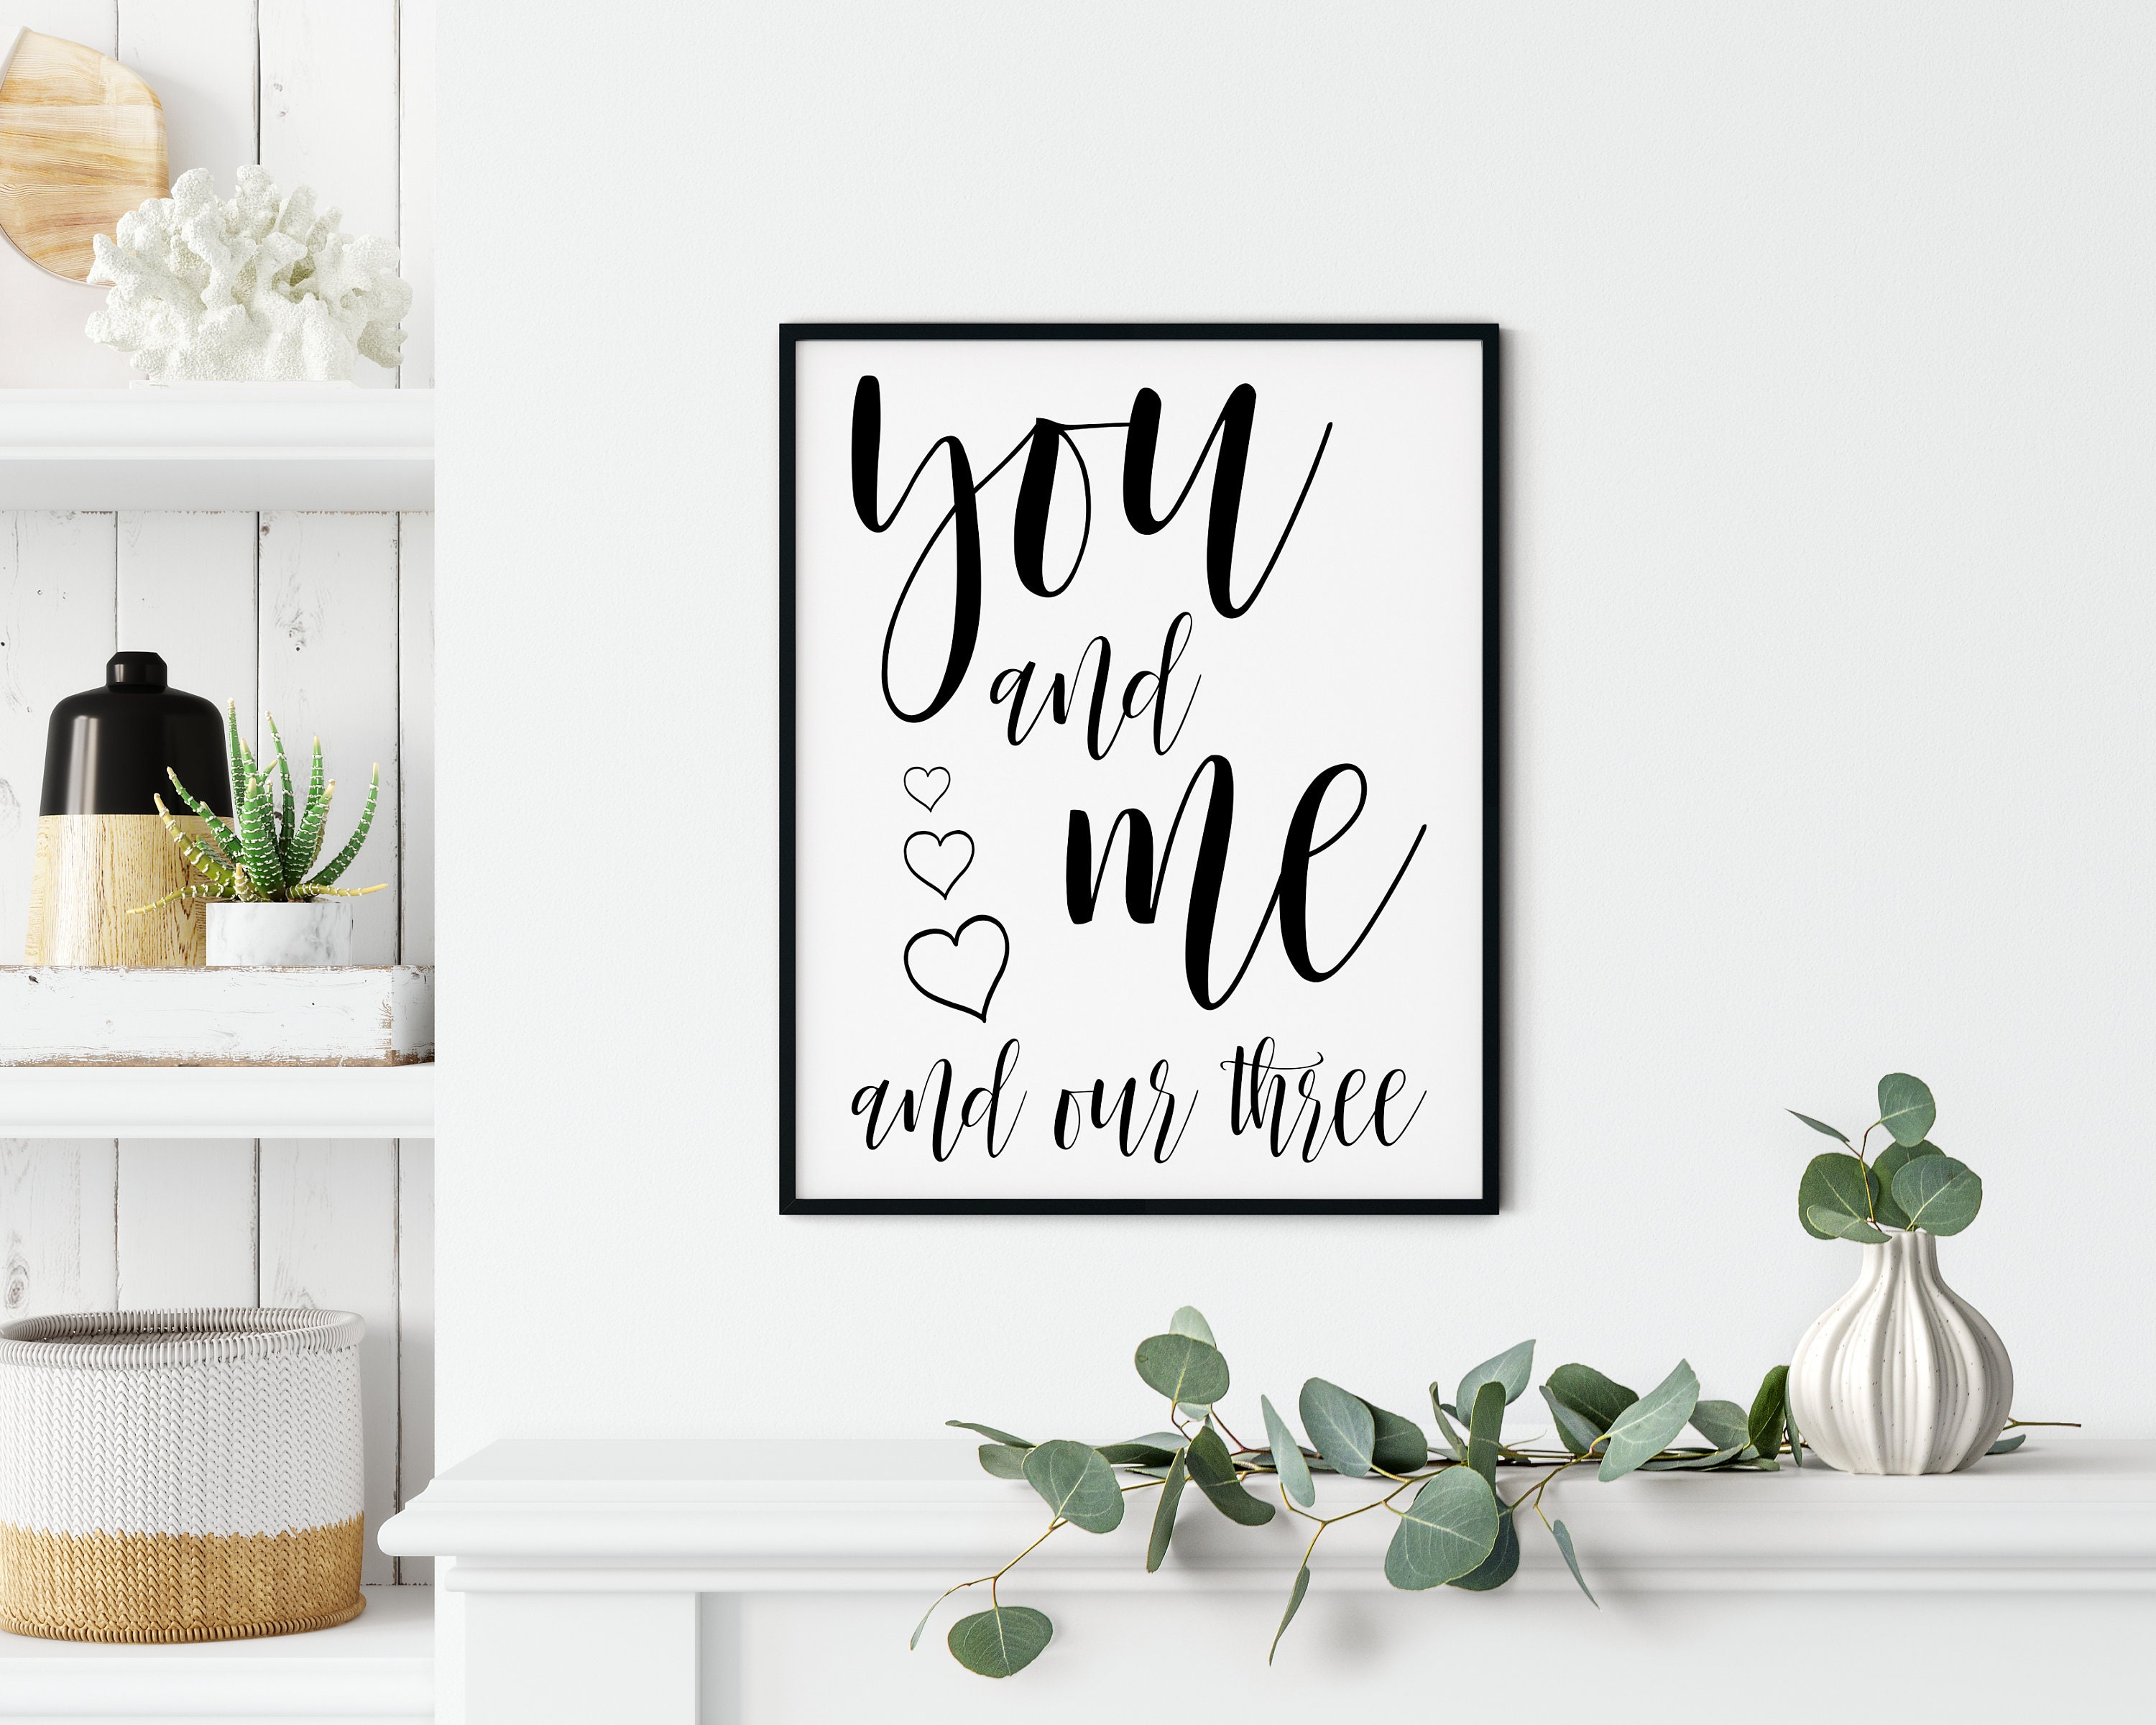 Family Art Printable Wall Art Sign you and me and our three | Etsy